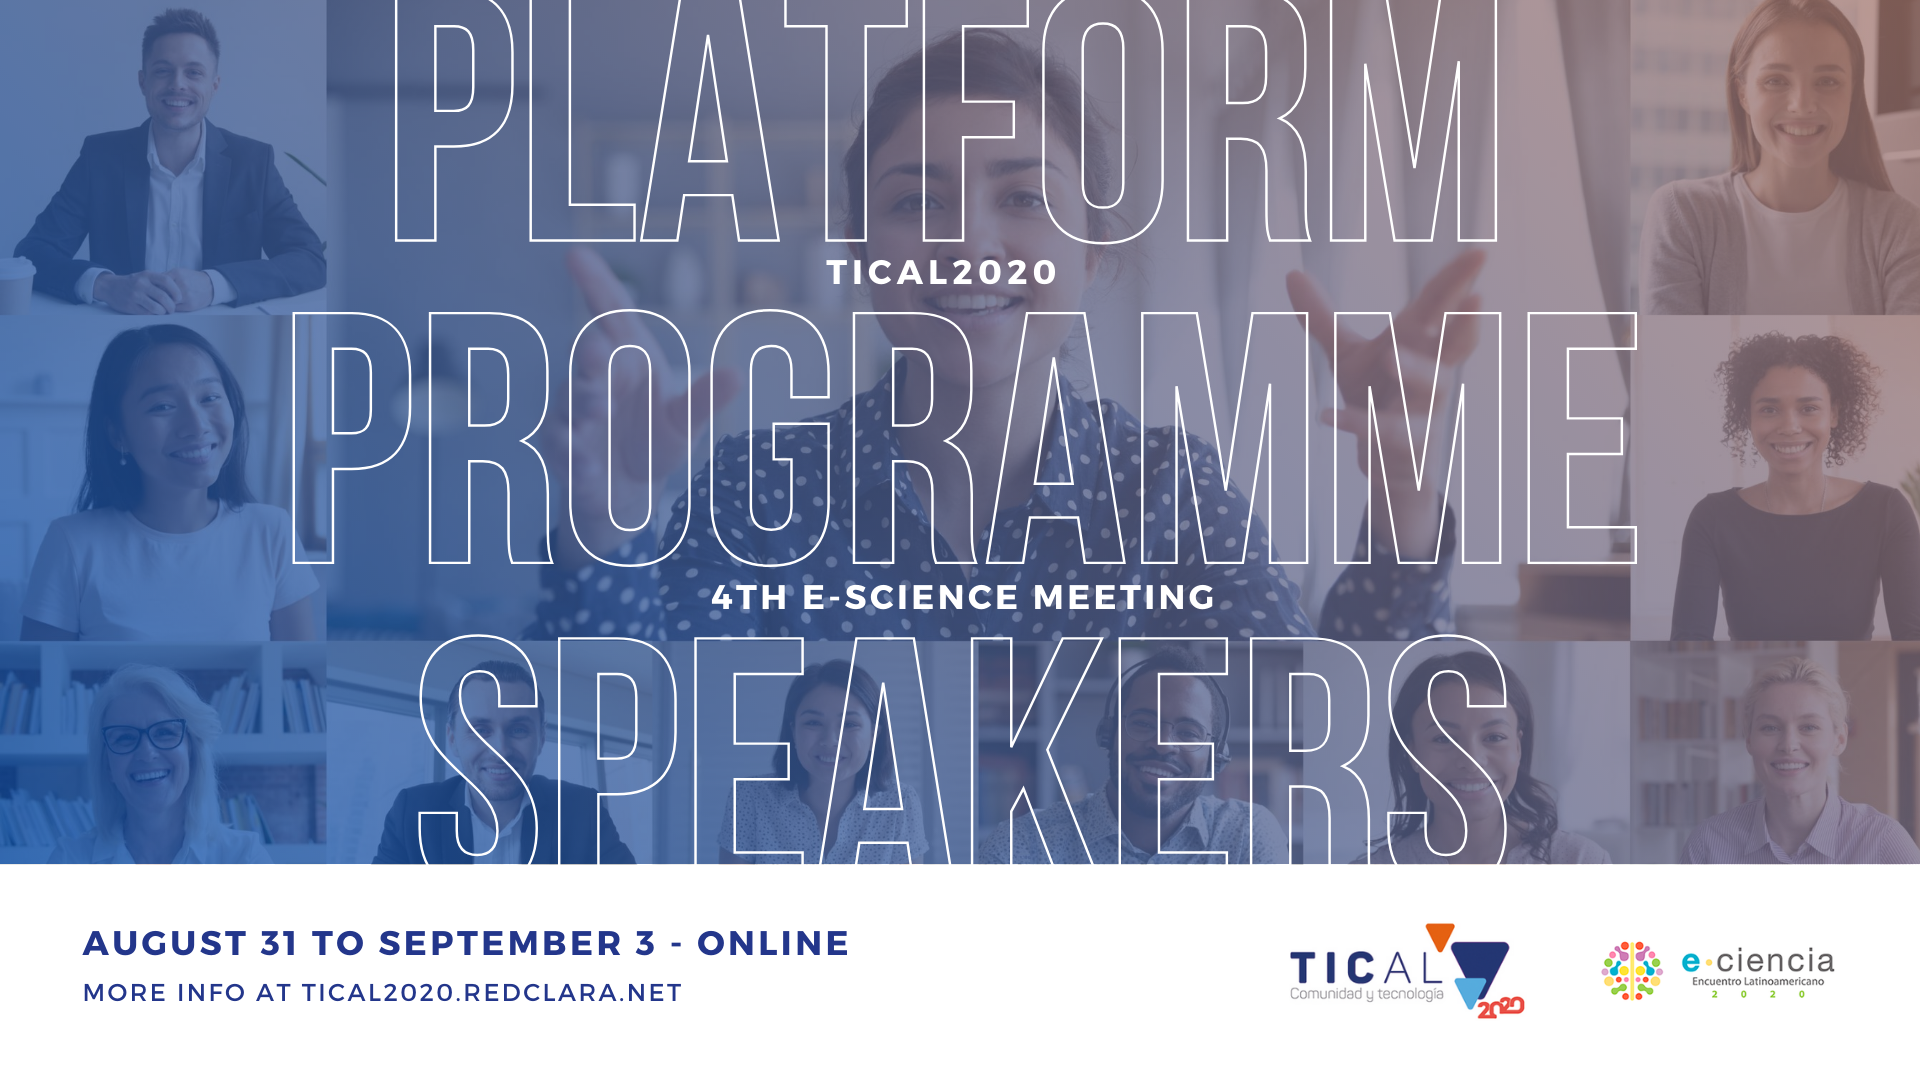 With free registration, TICAL2020 and the 4th e-Science Meeting announced their programme, speakers and new online platform